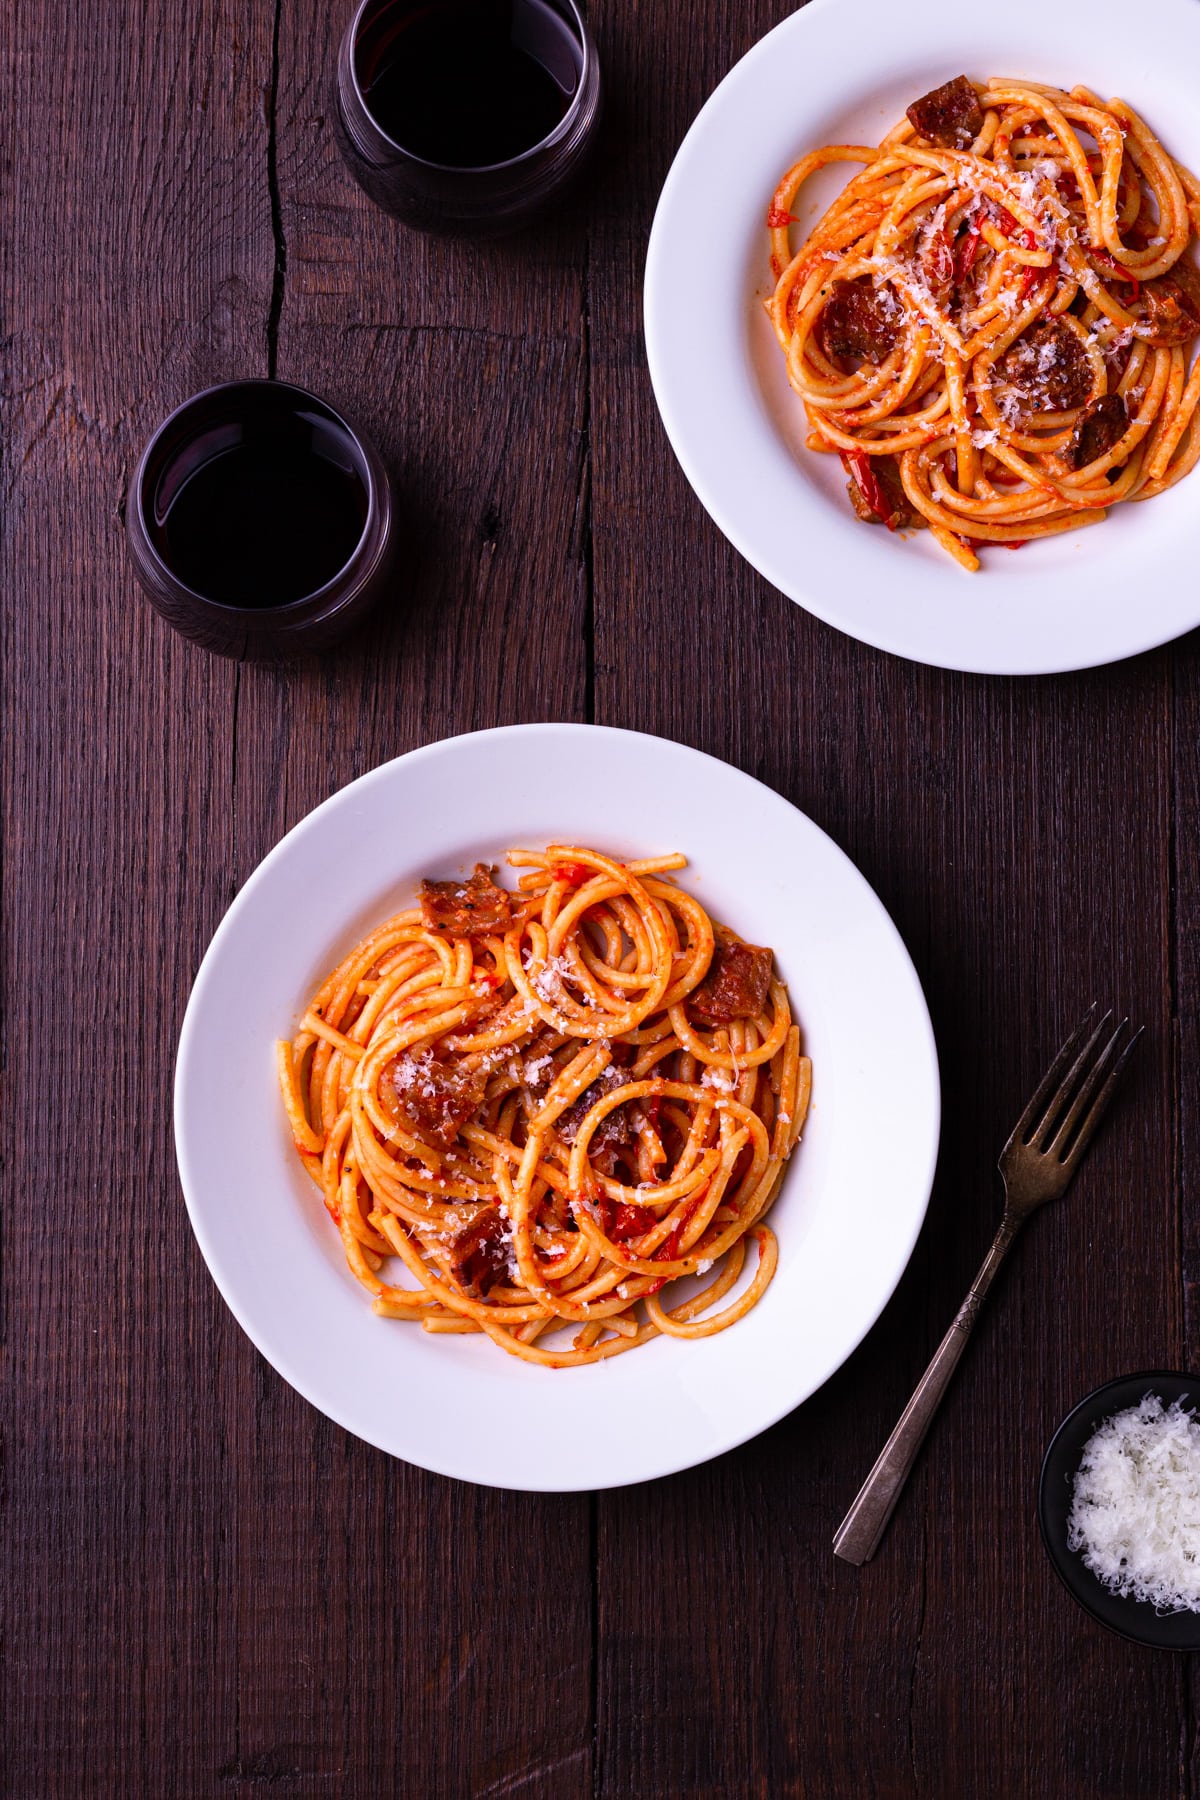 Two bowls of pasta with Amatriciana sauce topped with grated pecorino cheese, surrounded by glasses of red wine and a fork.